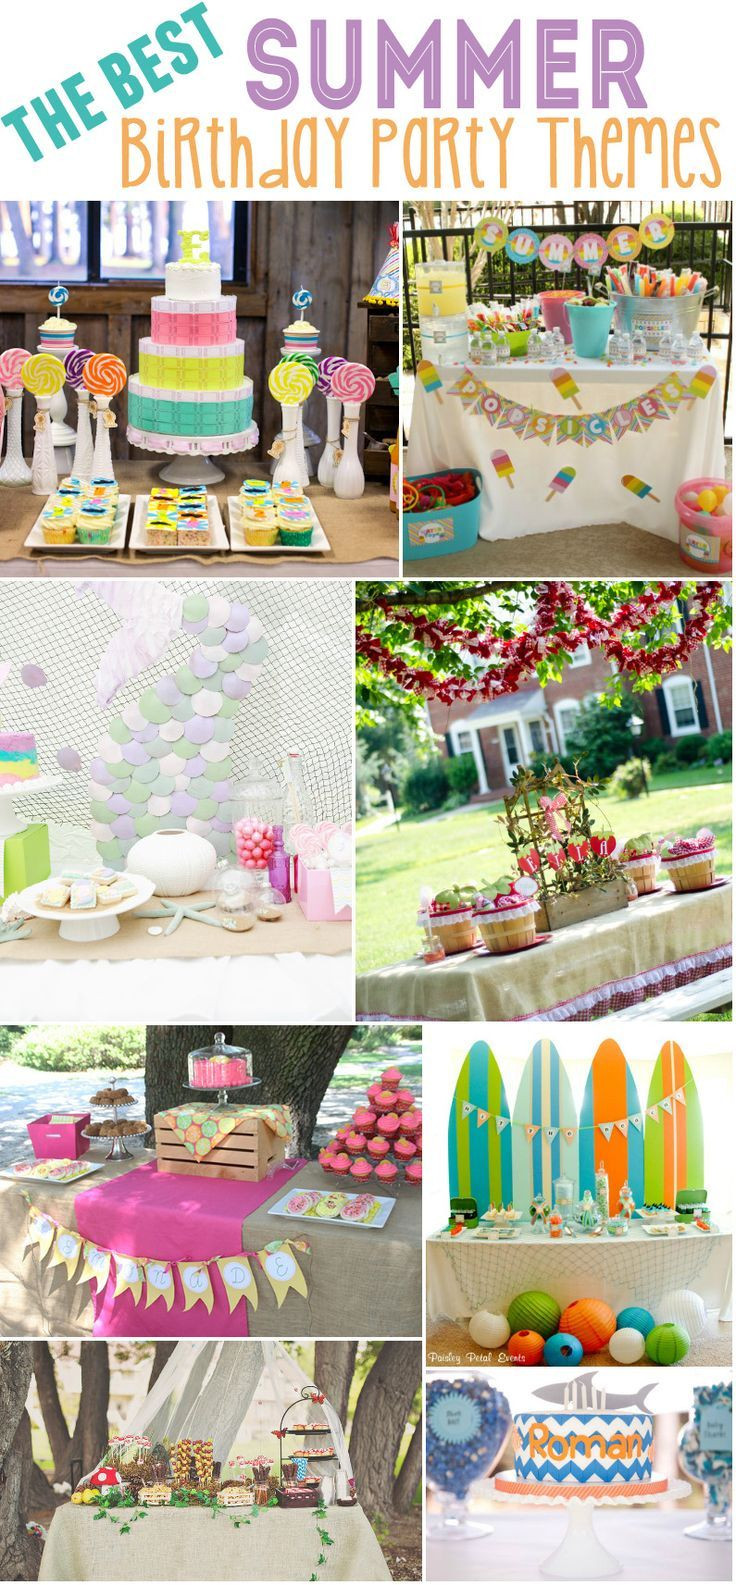 Ideas For A Summer Party
 15 Best Summer Birthday Party Themes